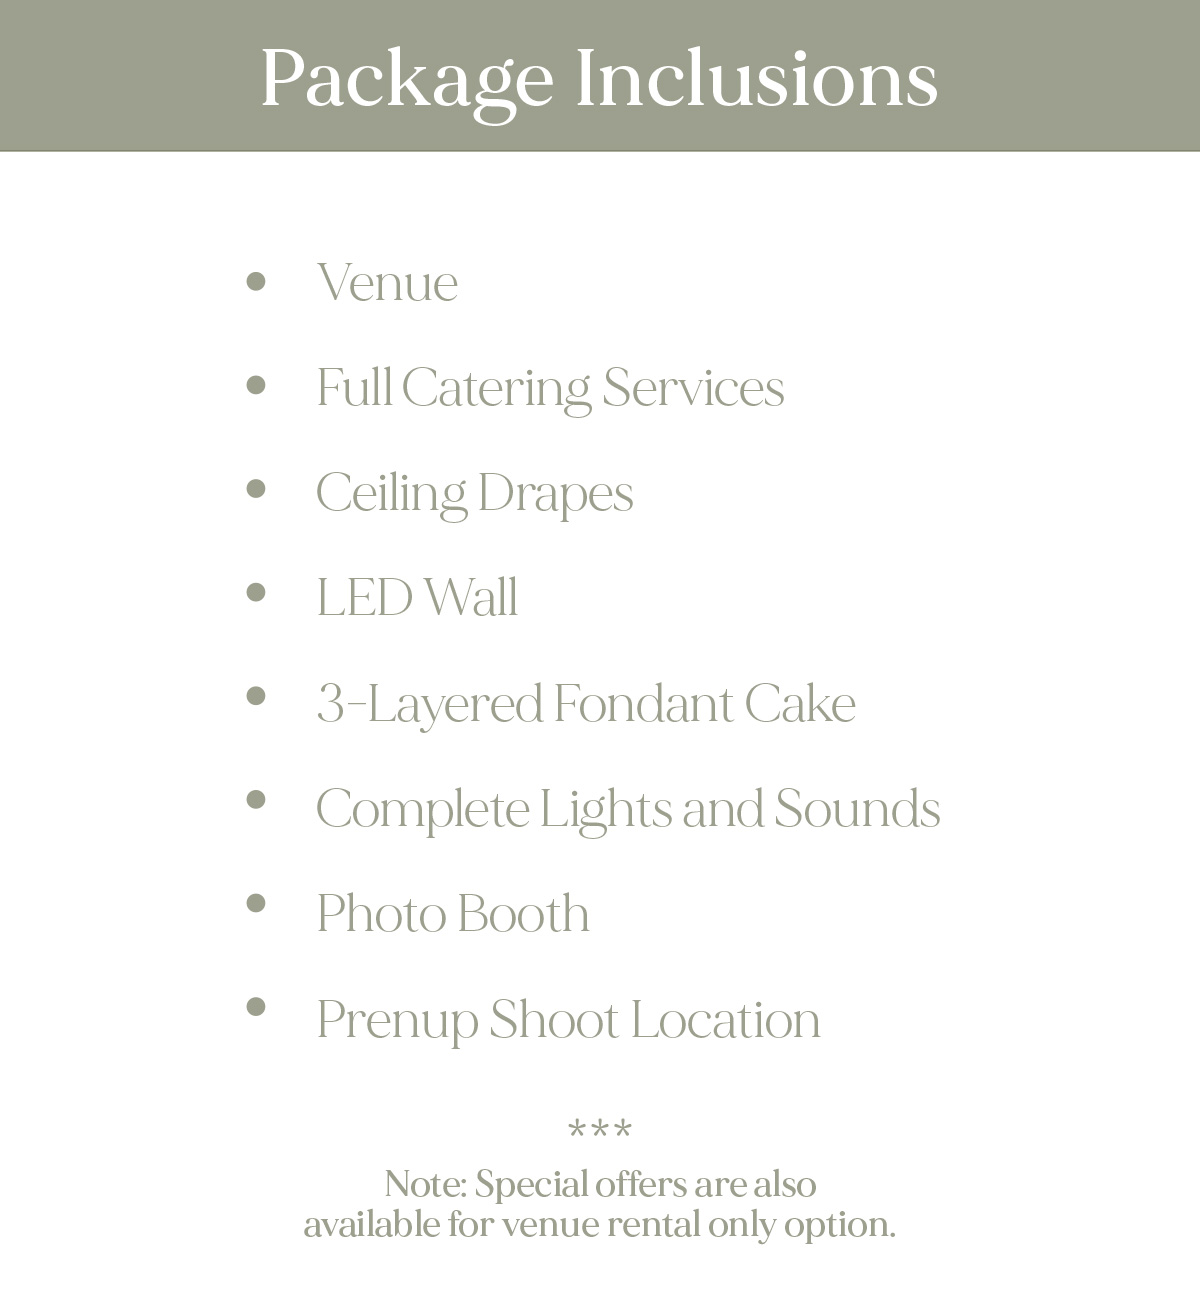 Package Inclusions: Venue Full Catering Services Ceiling Drapes LED Wall 3-Layered Fondant Cake Complete Lights and Sounds Photo Booth Prenup Shoot Location Note: Special offers are also available for venue rental only option.